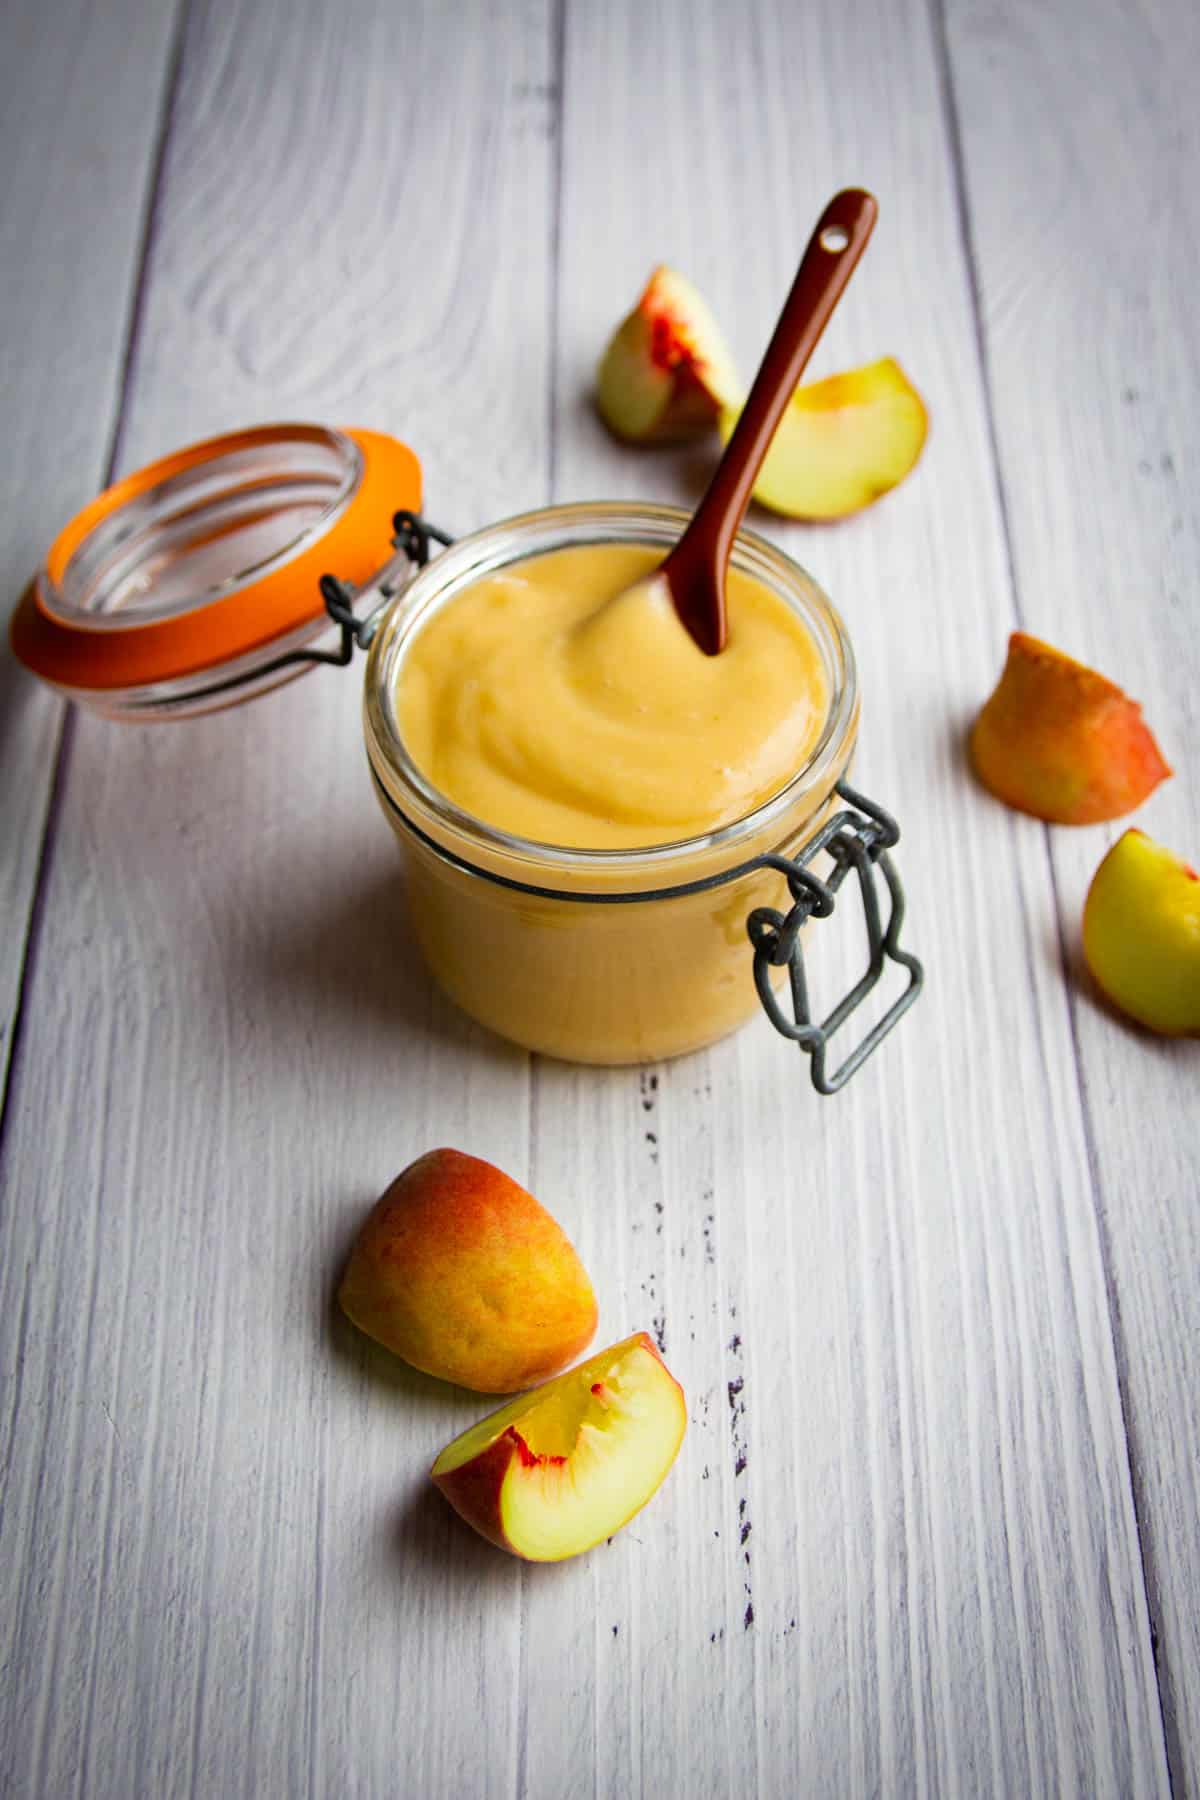 The white peach puree on a spoon with fresh peaches in the background.